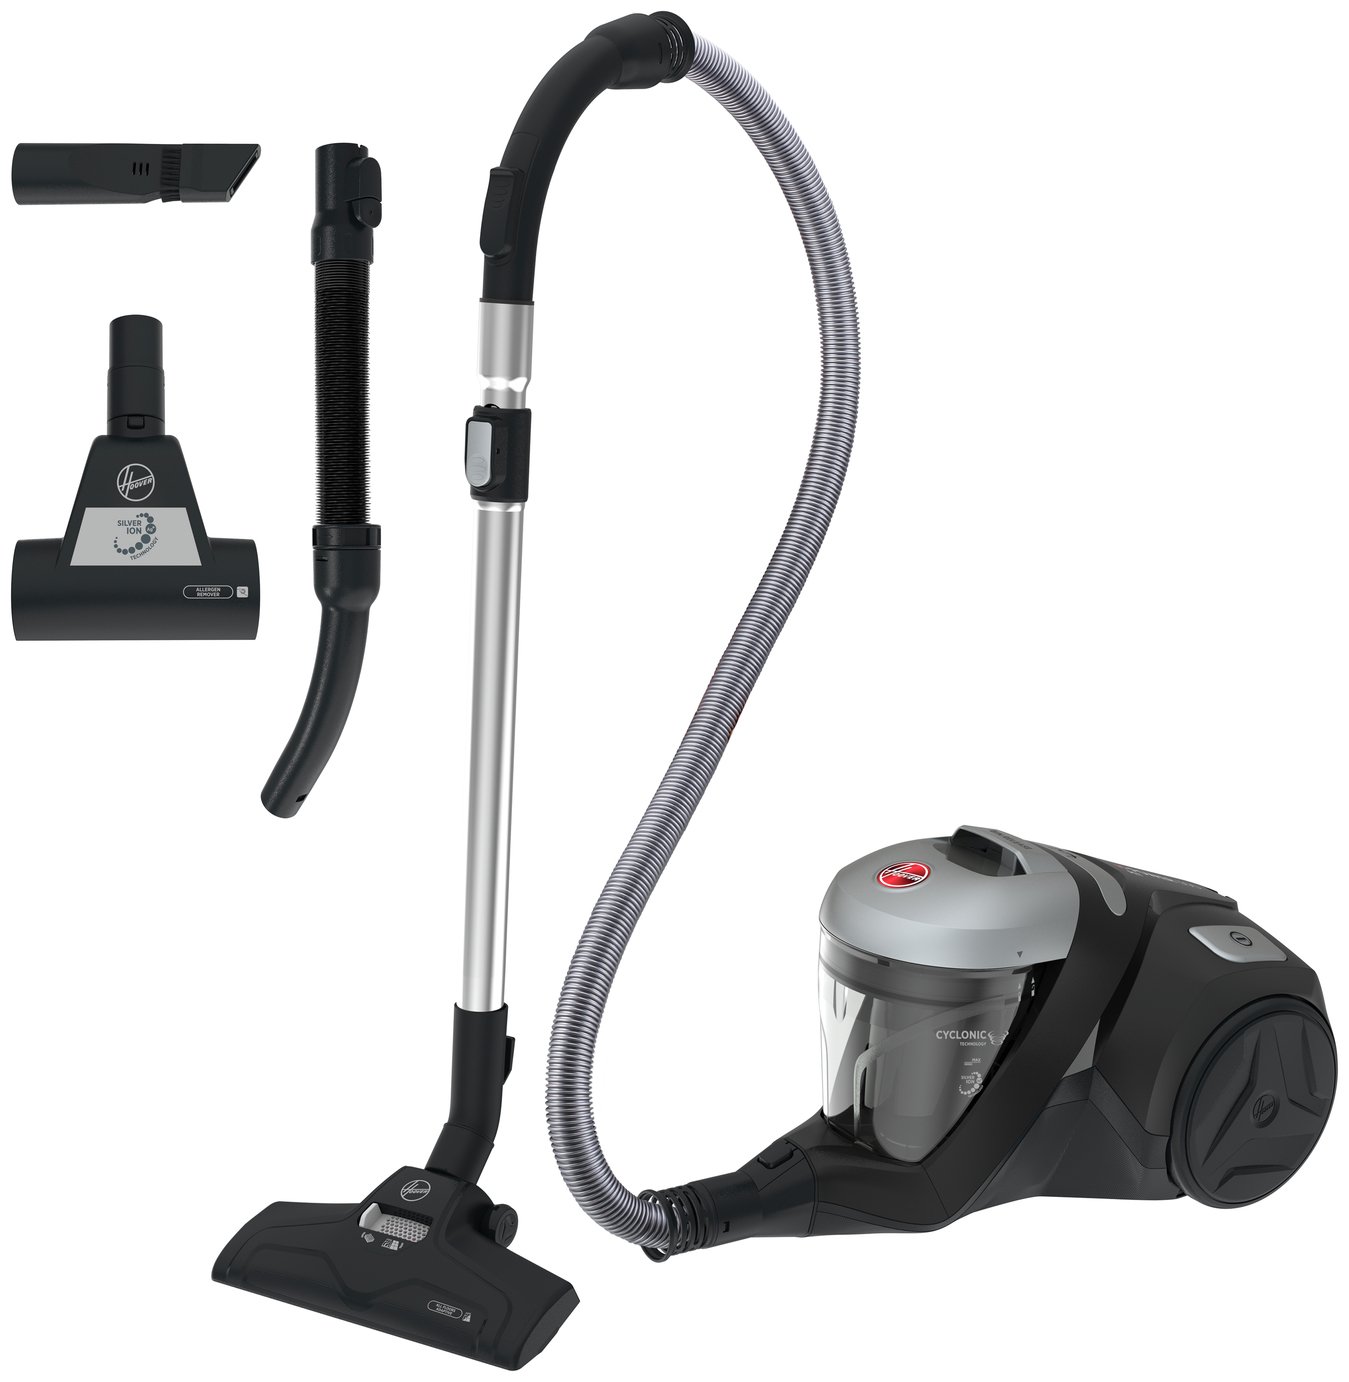 Hoover H-POWER 300 Pets Corded Bagless Cylinder Cleaner